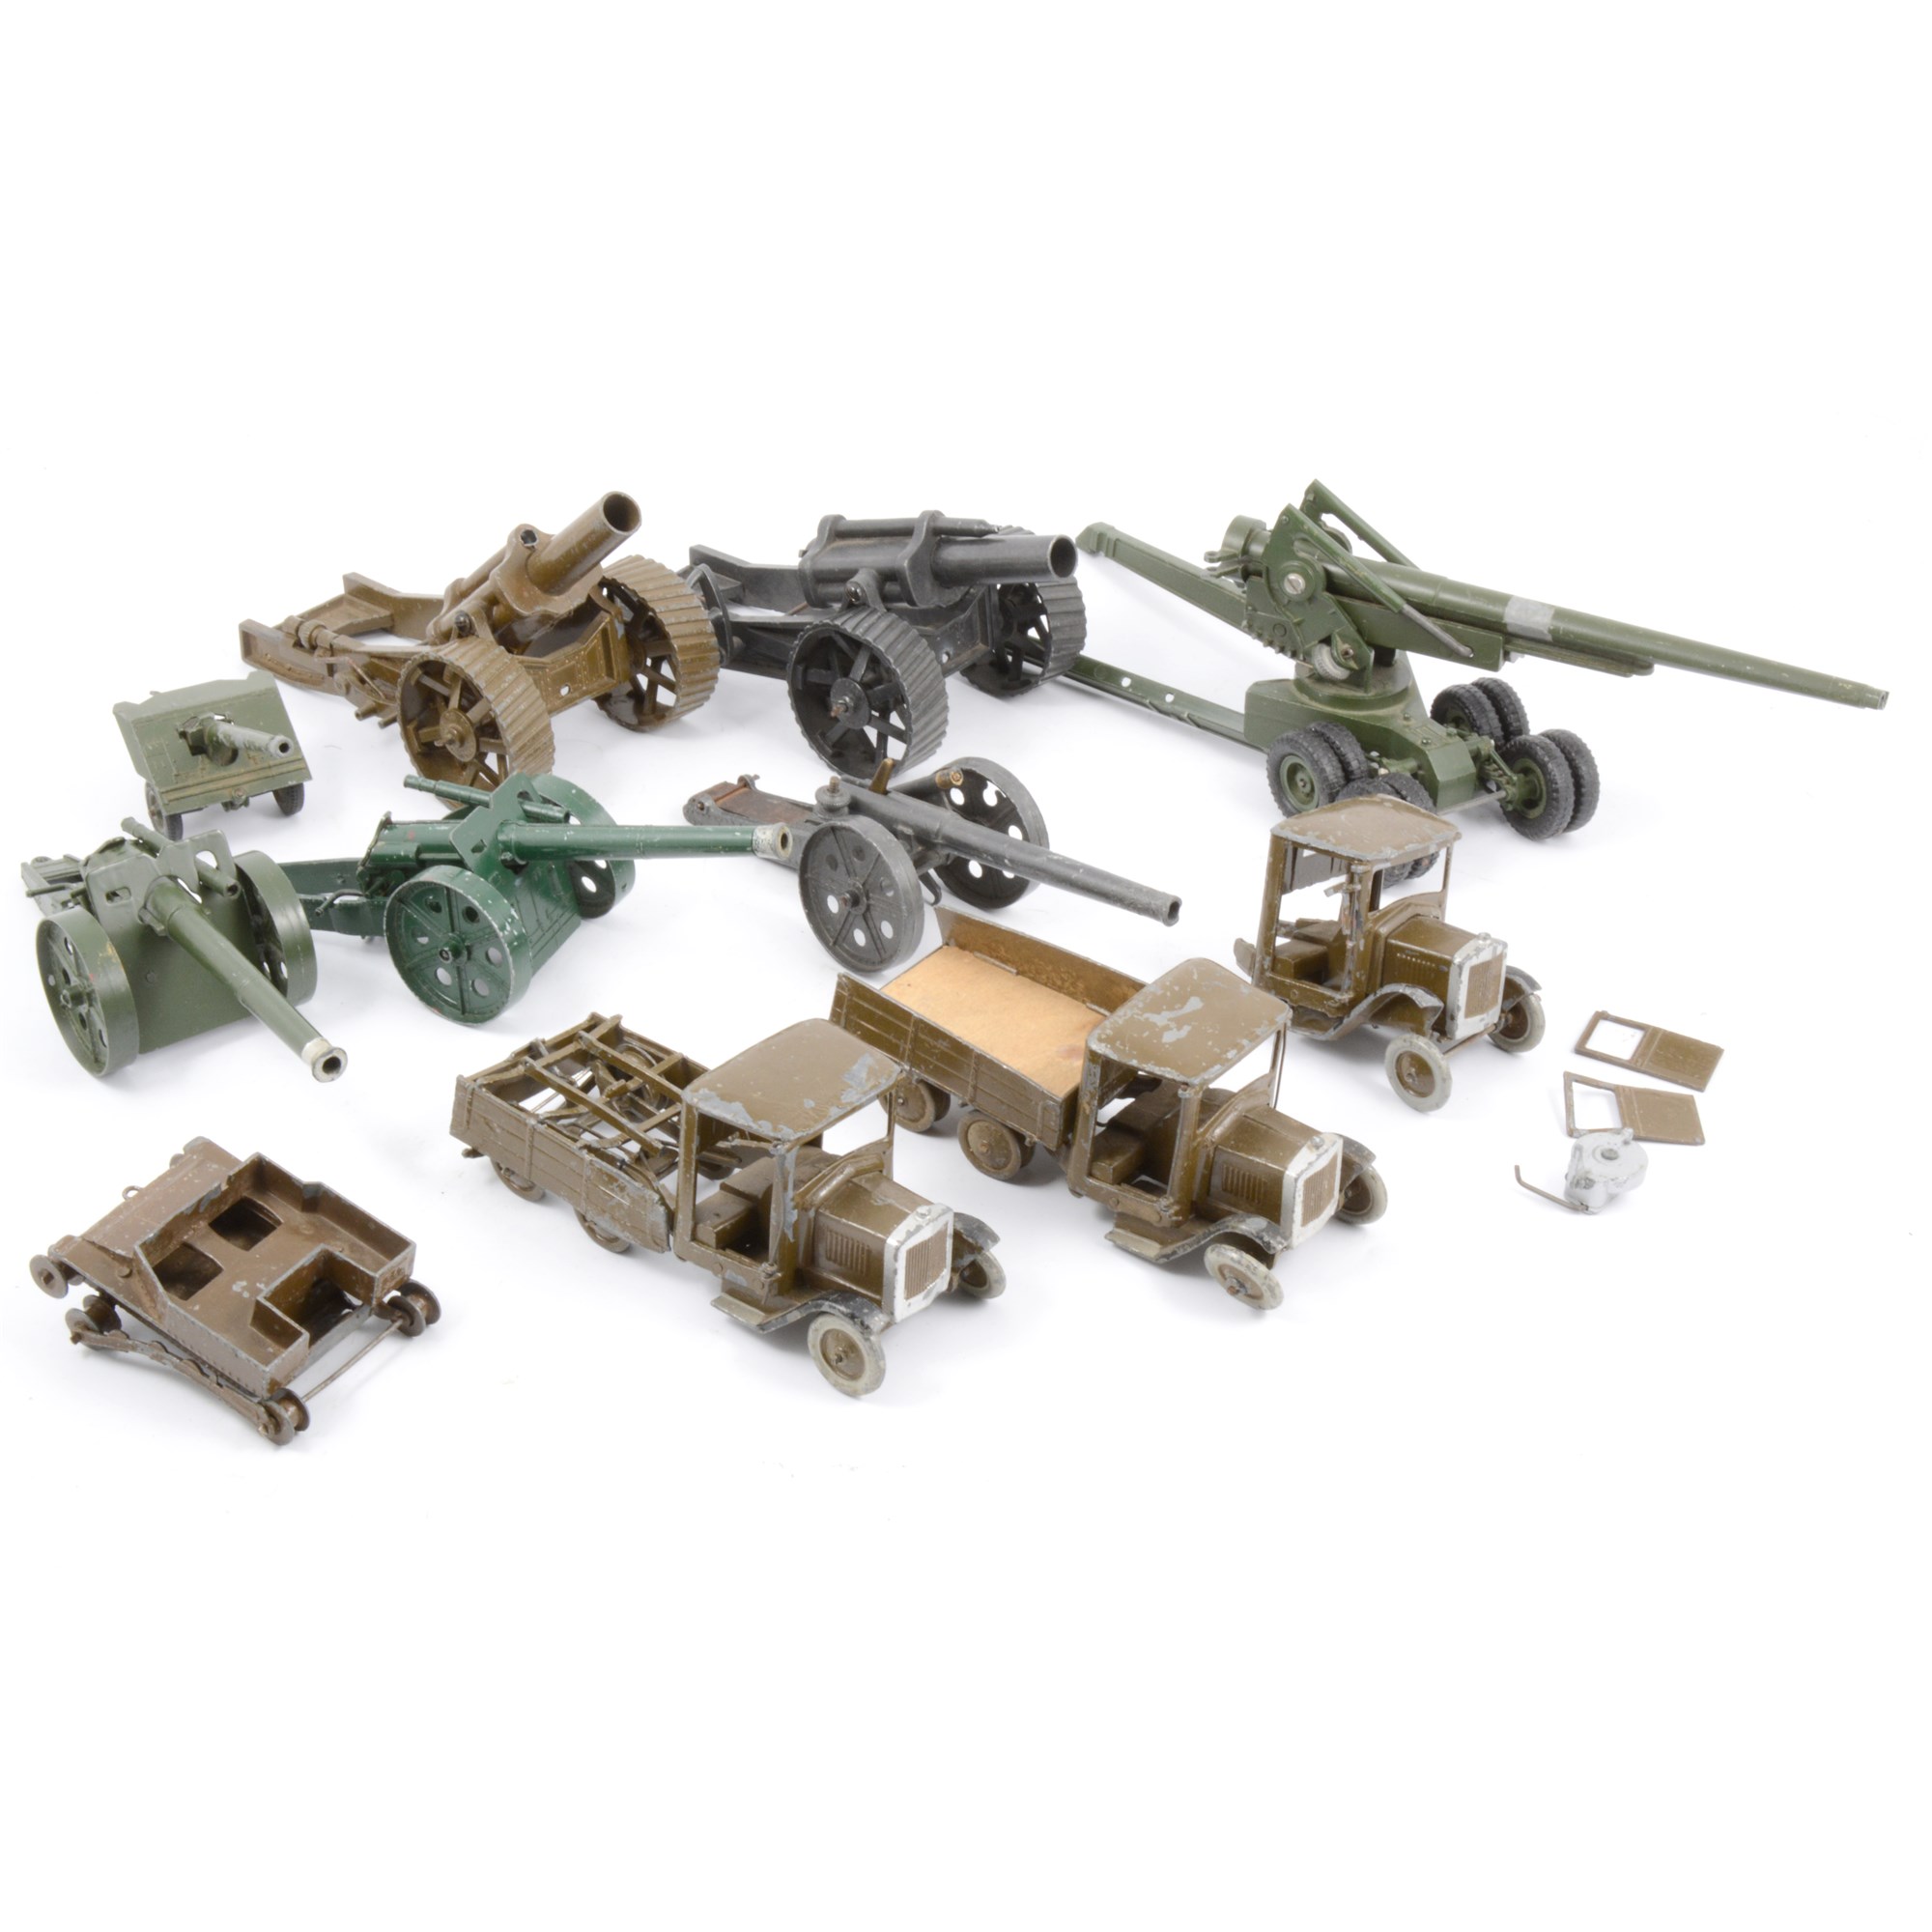 Britains diecast military models, including